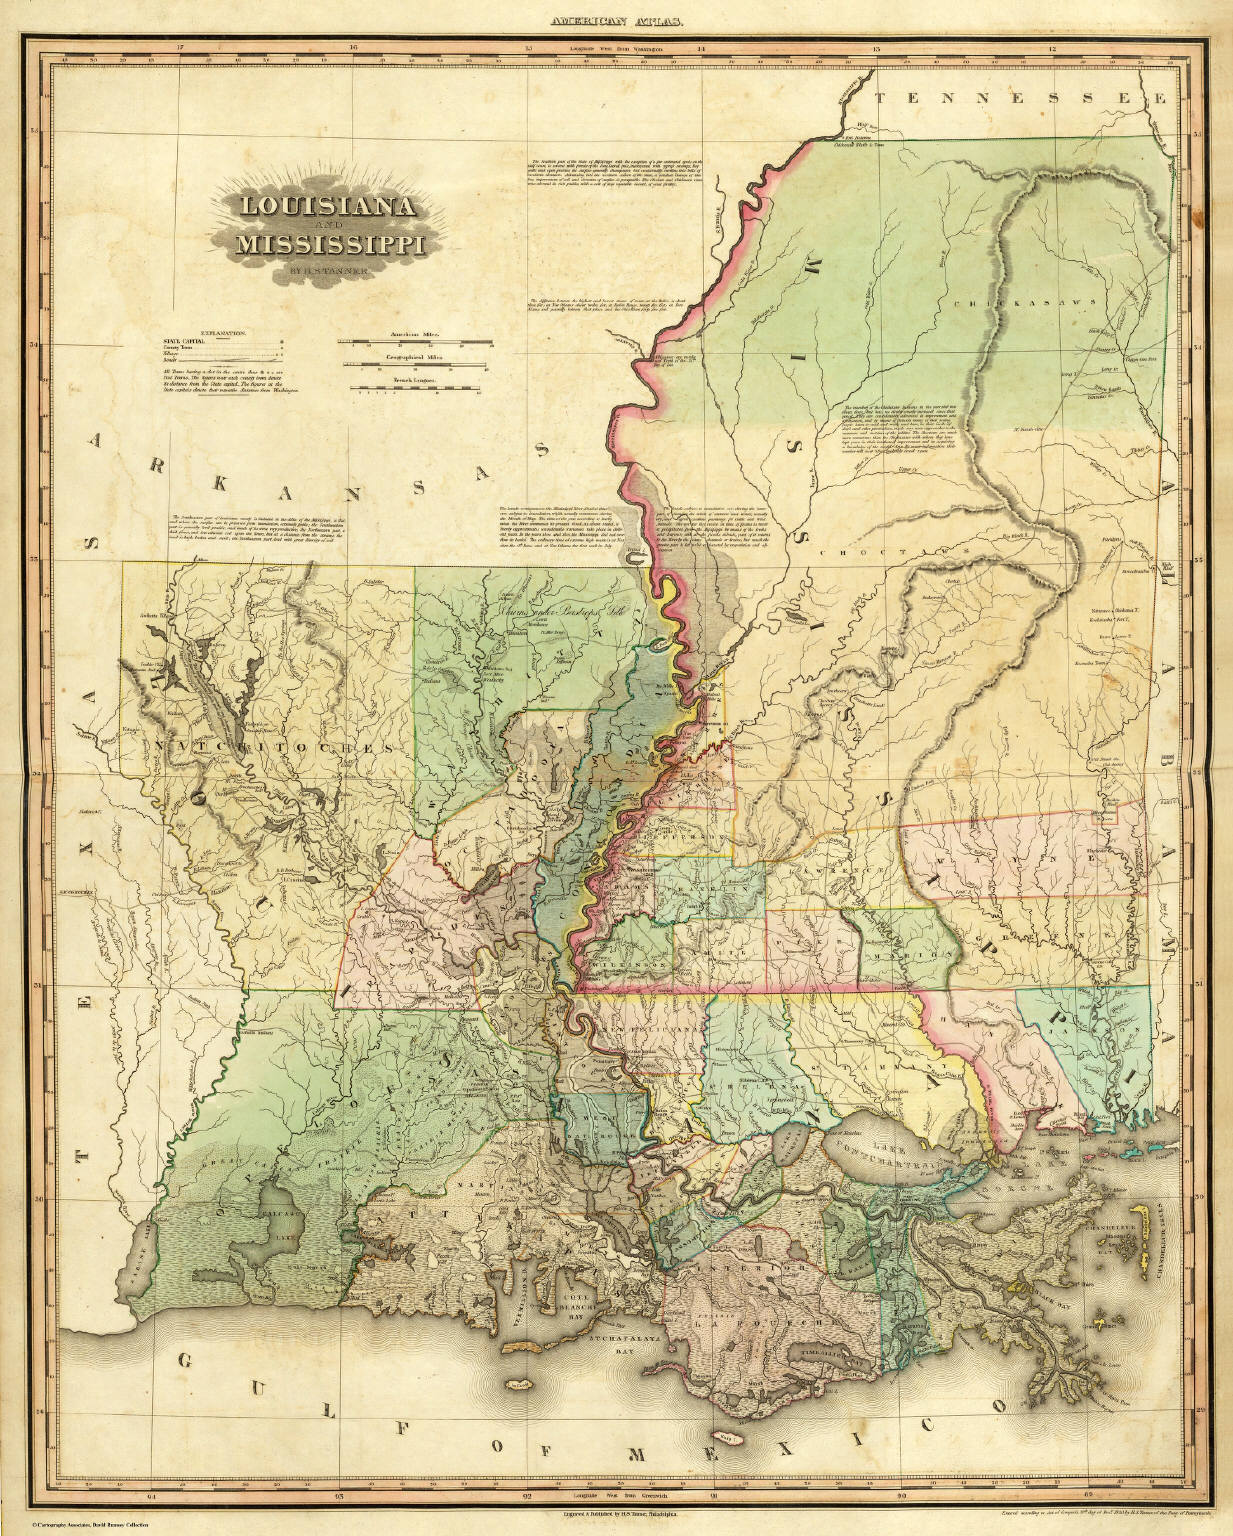 Louisiana And Mississippi David Rumsey Historical Map Collection 5276